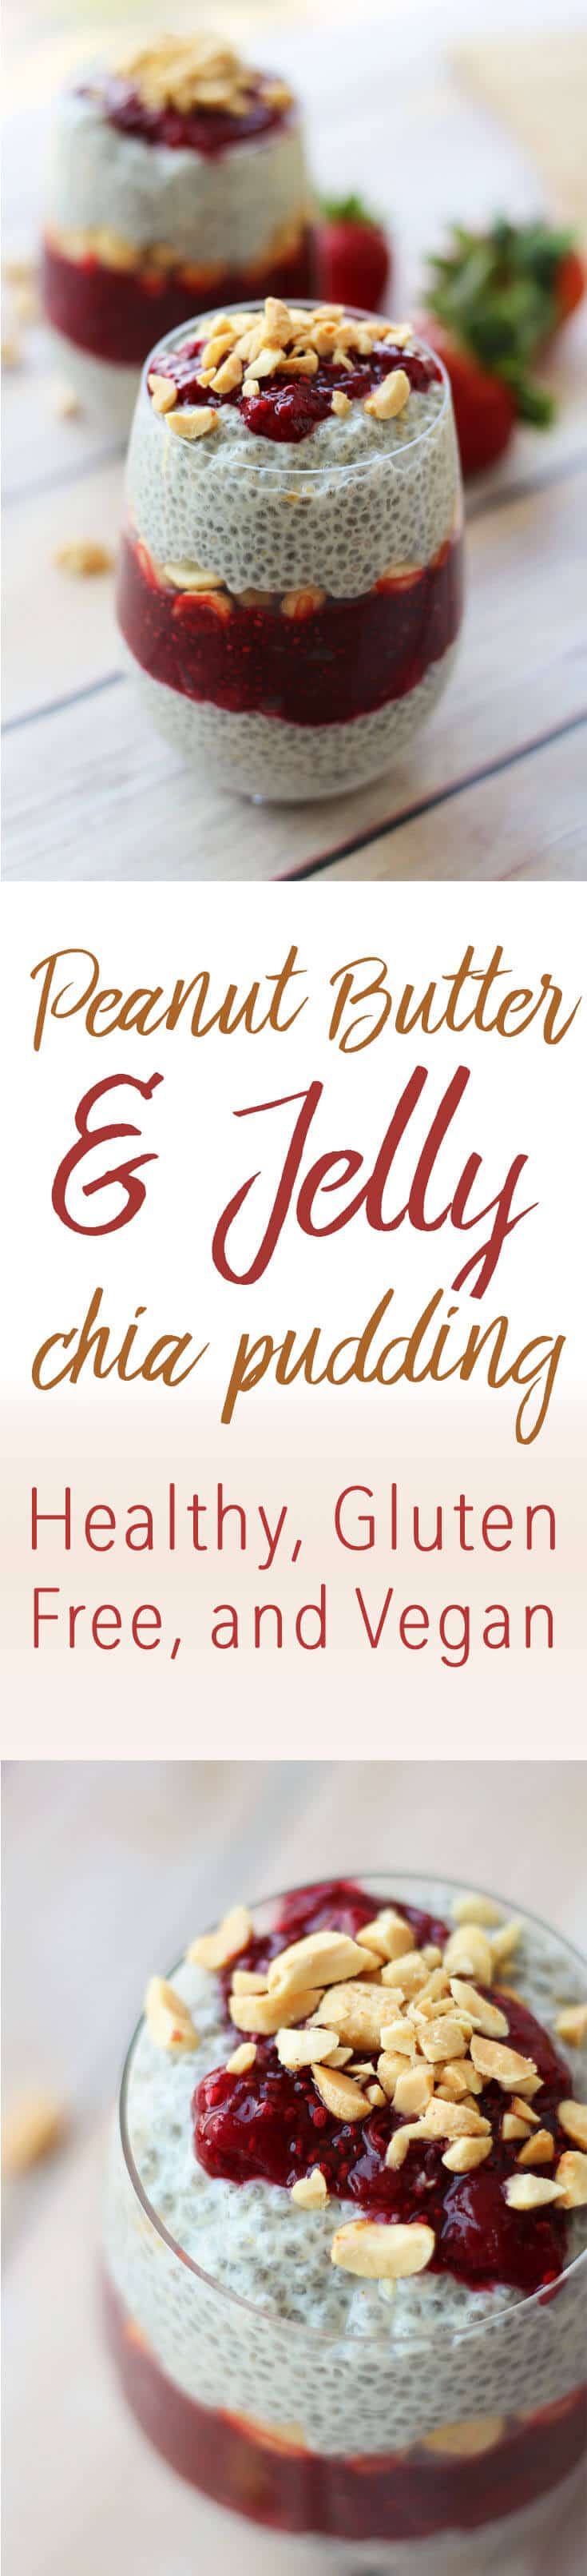 A pinterest image of chia pudding with the overlay text \"Peanut Butter & Jelly Chia Pudding Healthy, Gluten Free, and Vegan.\"